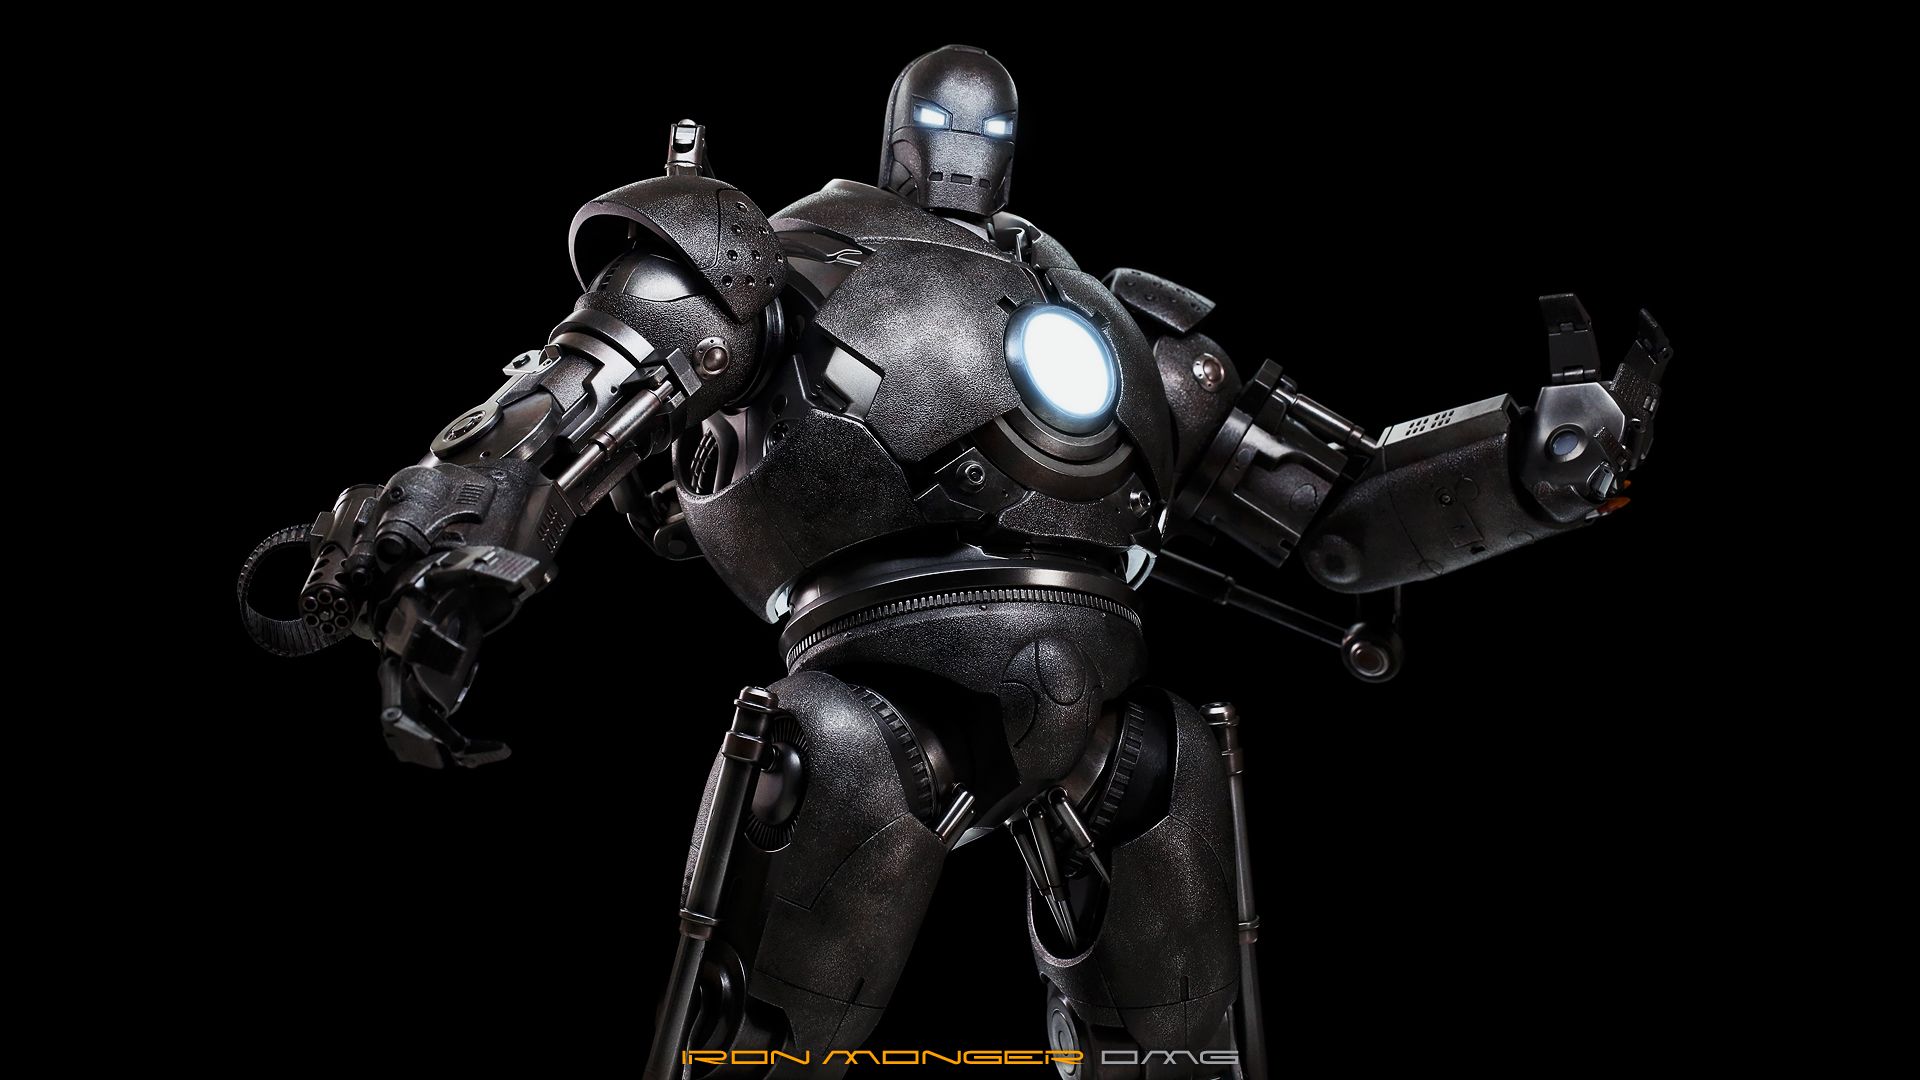 [Hot Toys] Iron Man: Iron Monger 1/6th scale - Limited Edition Collectible Figurine - Página 9 IronMongerHD103_zps0a3ba4ef